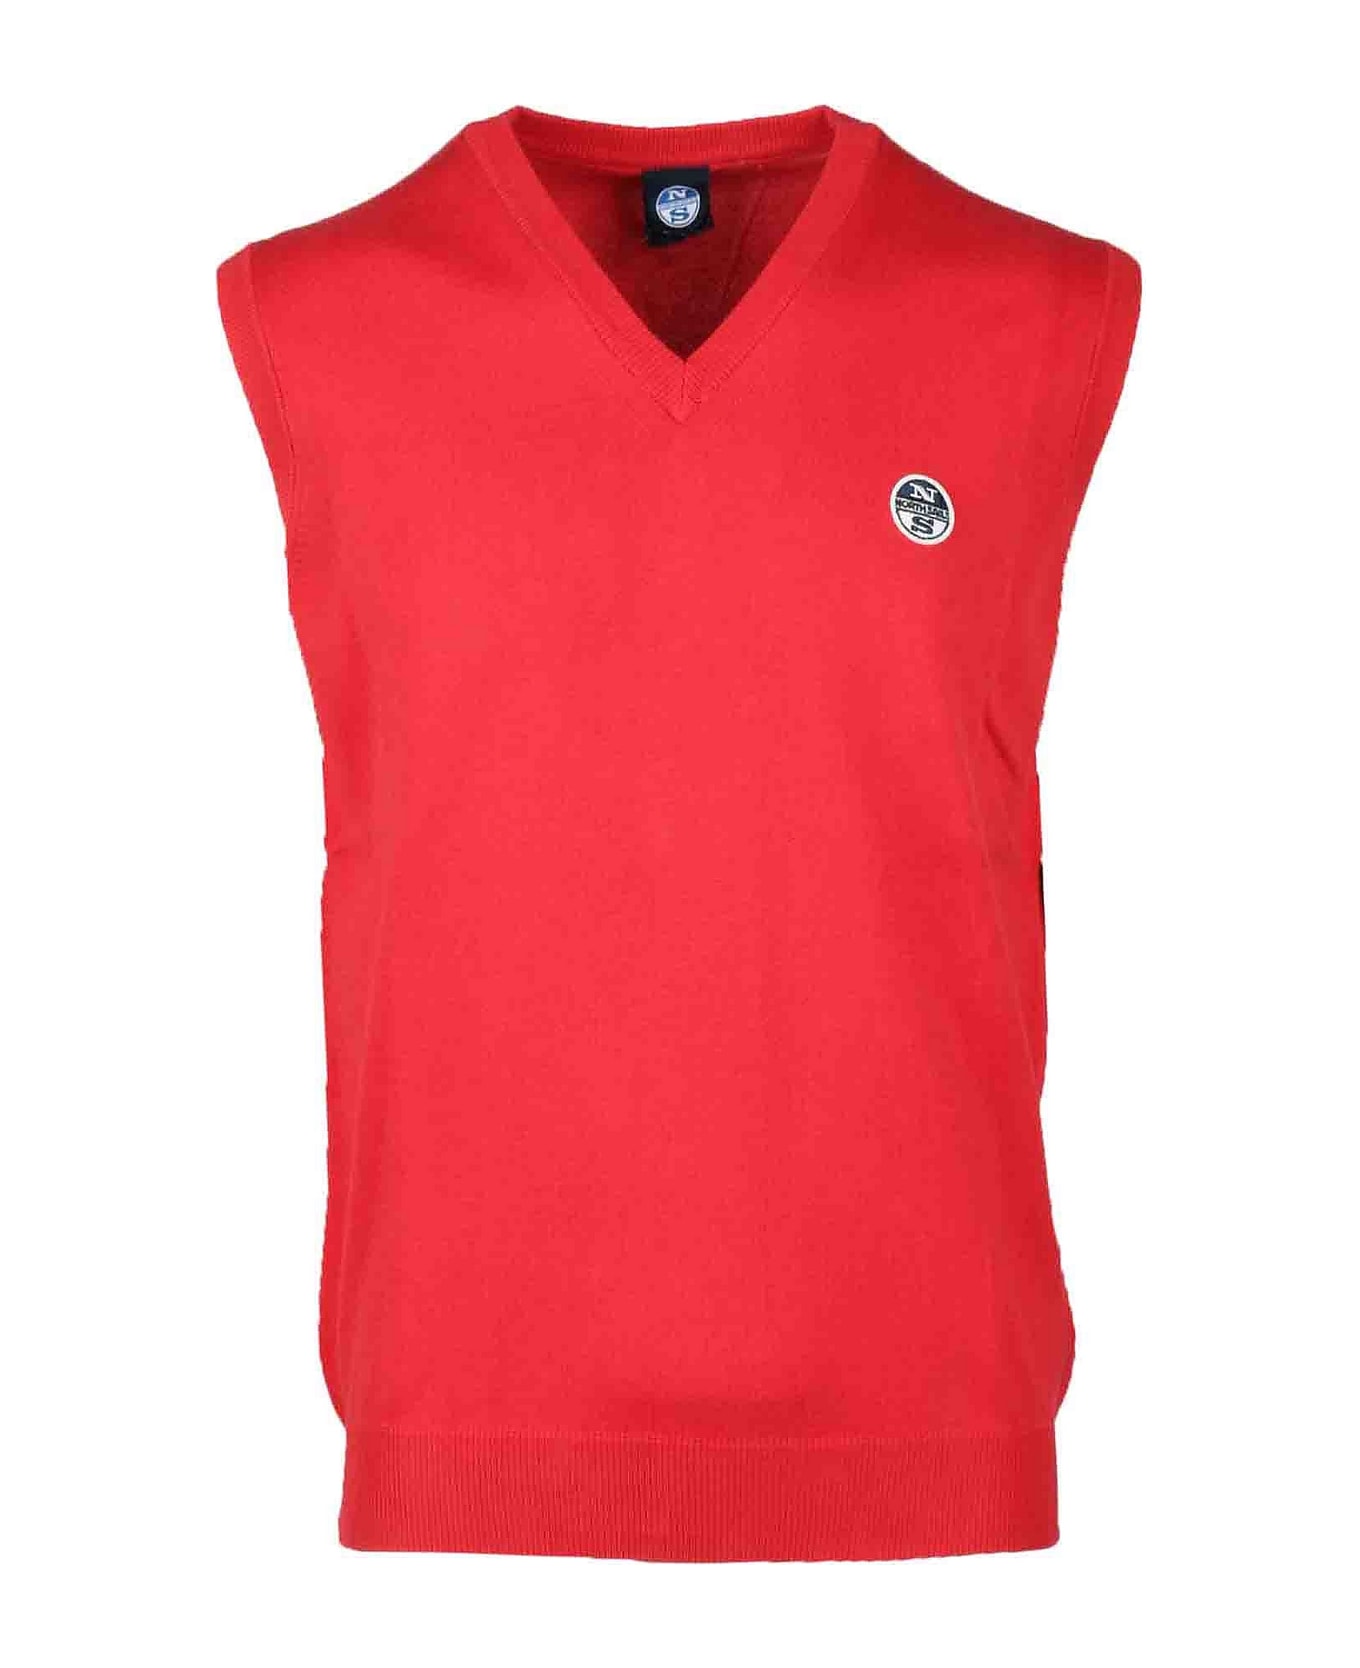 North Sails Men's Red Sweater - Red